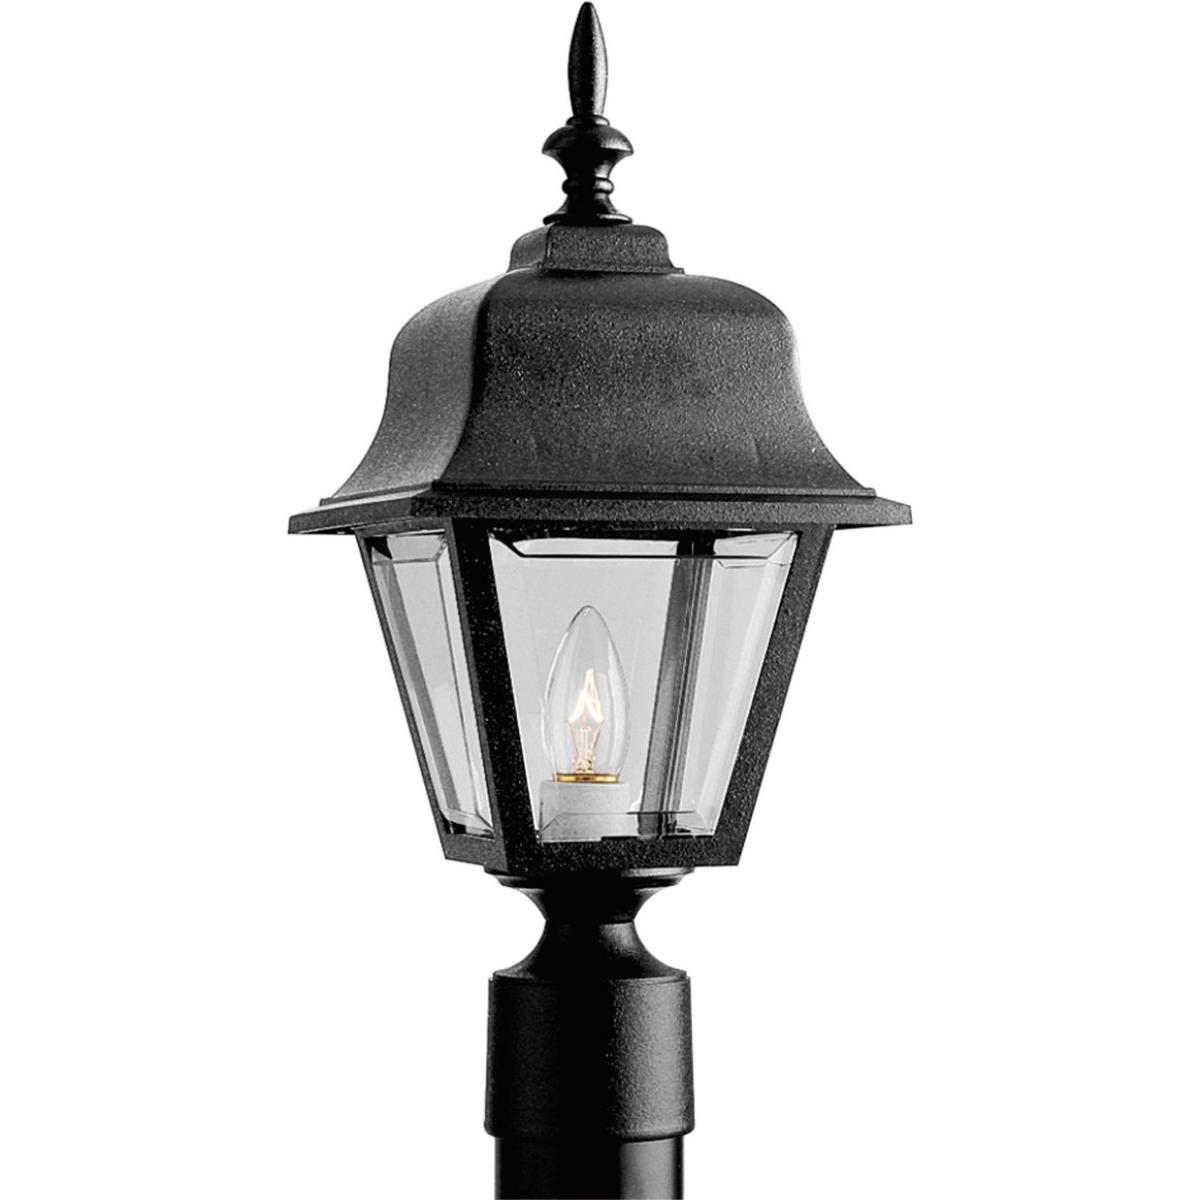 Hubbell P5456-31 Set this sculpted post lantern near your walkway to guide guests inside, or let it light up a patio for outdoor gatherings. Its crystal clear acrylic panels stand up to harsh weather, and 100-watt lighting provides brilliant, far-reaching illumination. No